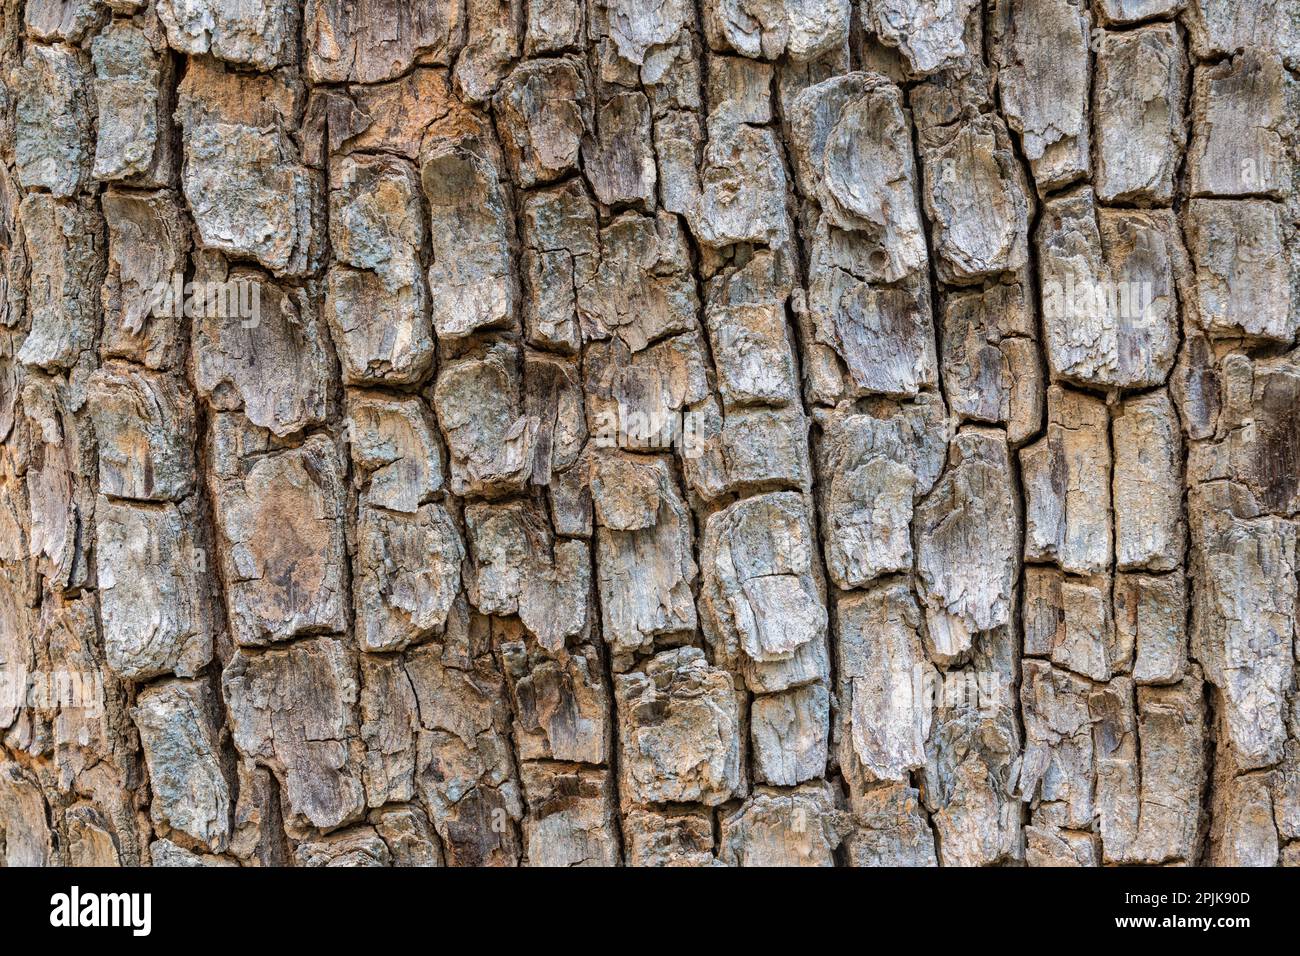 Closeup view of dipterocarpus alatus tropical tree bark, Thailand - natural background with graphic textured pattern Stock Photo